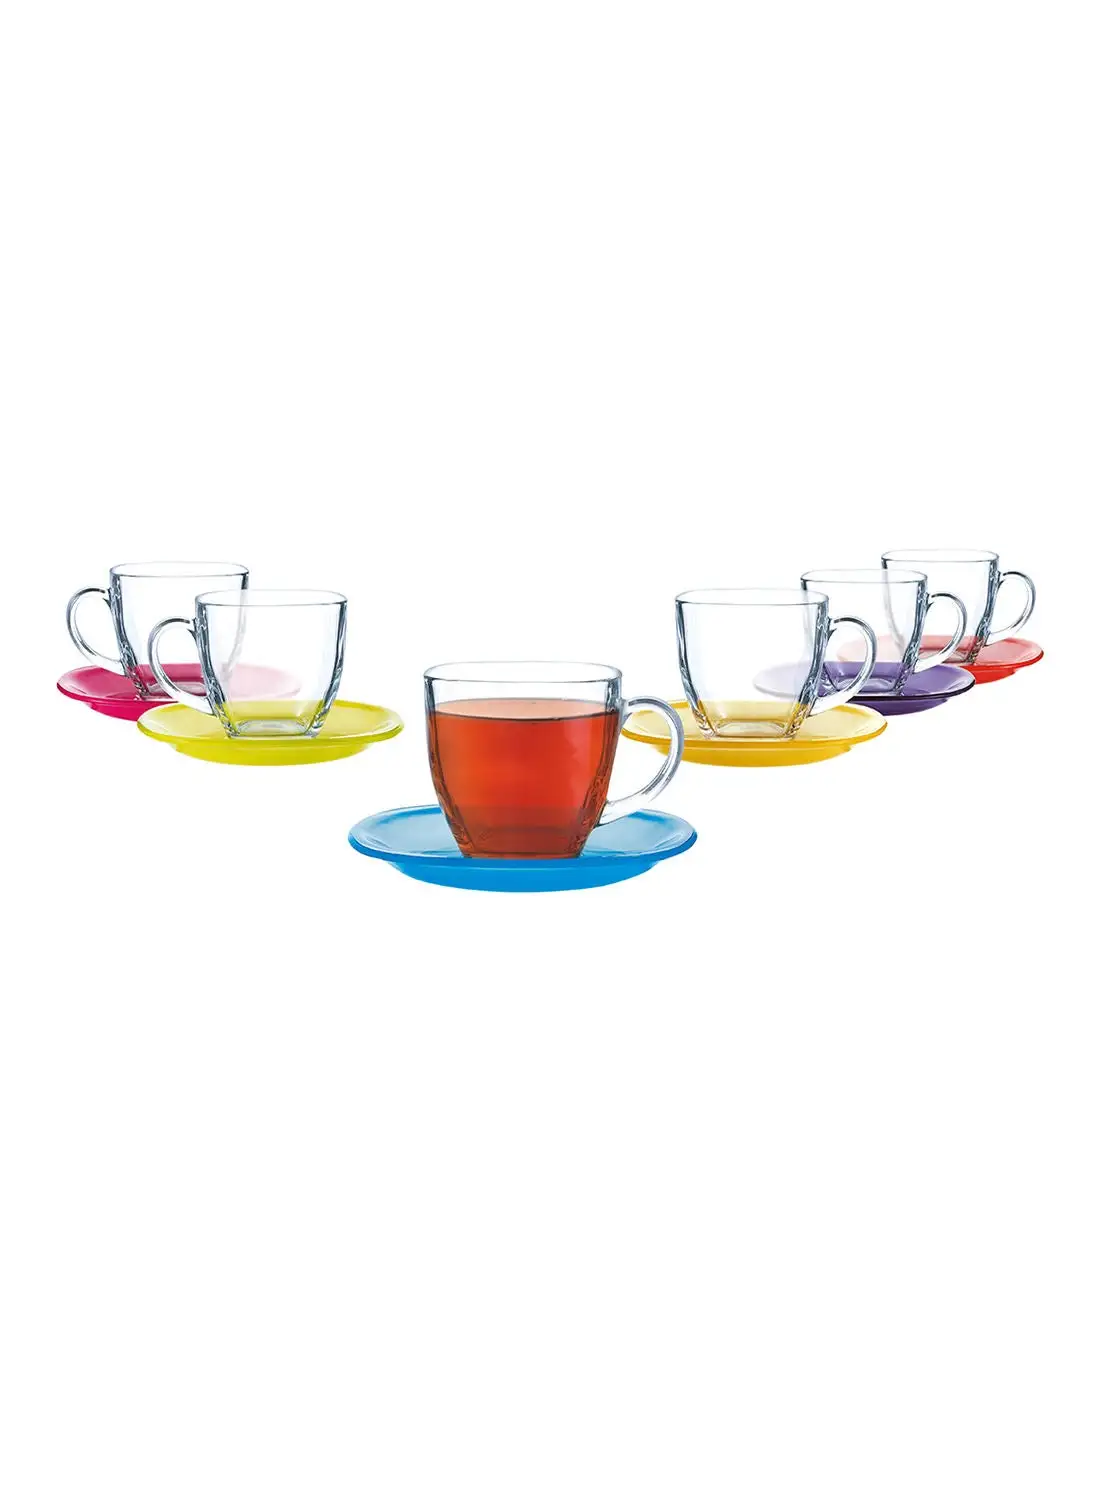 Luminarc 12 Piece Cup And Saucer Set - Tempered Glass - Premium Quality Tea And Coffee Cups Set - Coffee Cups - Tea Cups - Arabic Coffee Cups - Carina Rainbow